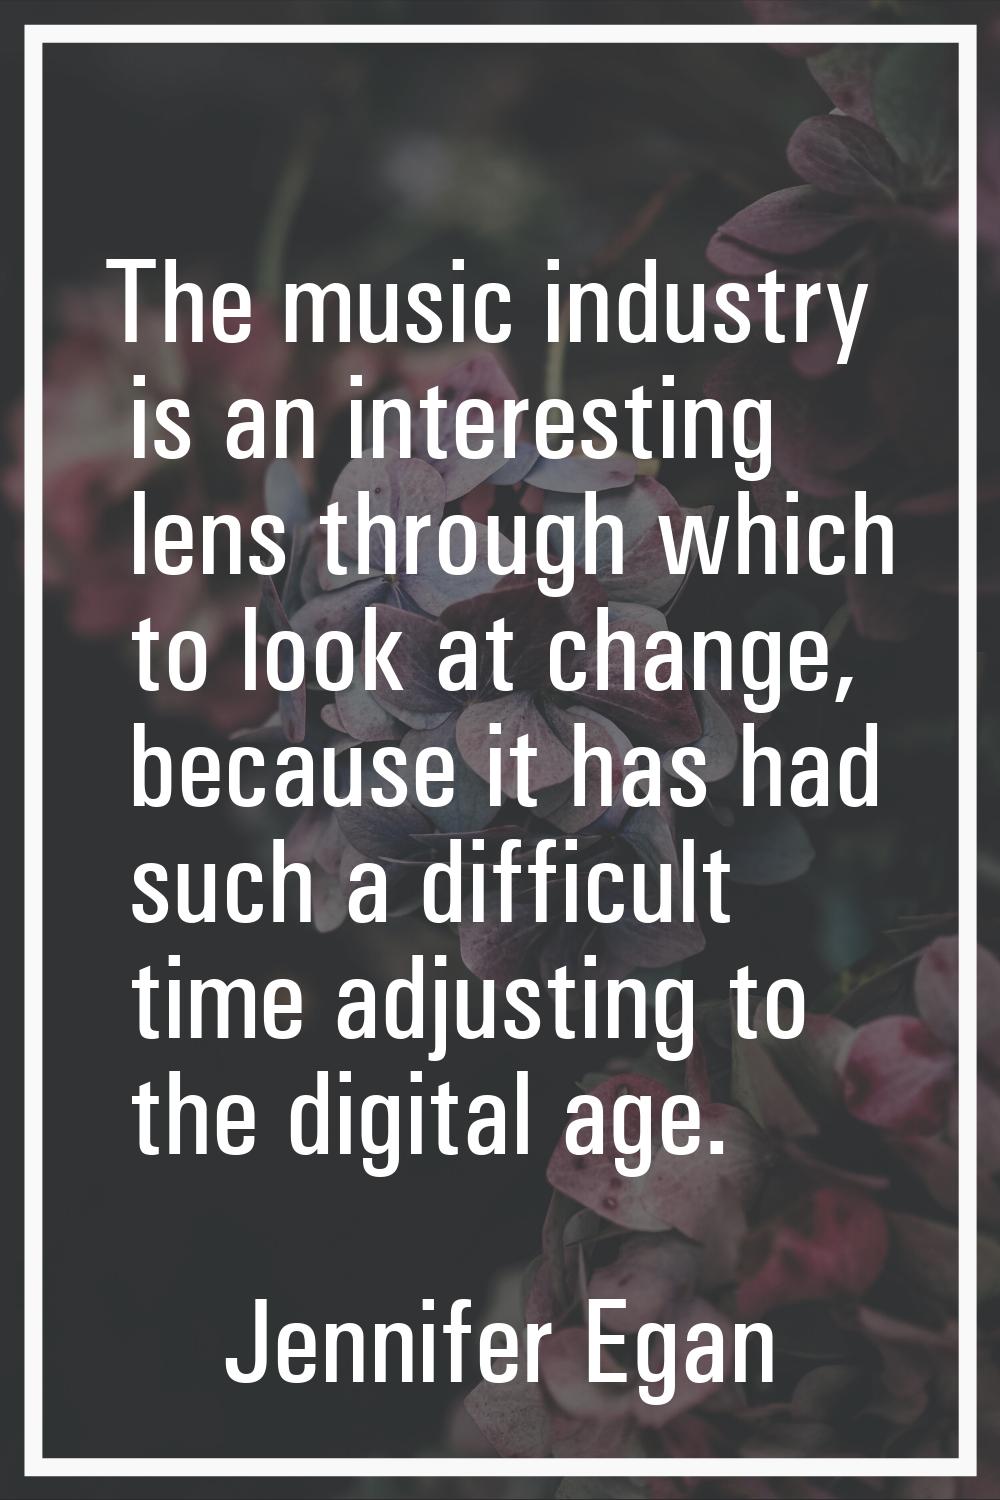 The music industry is an interesting lens through which to look at change, because it has had such 